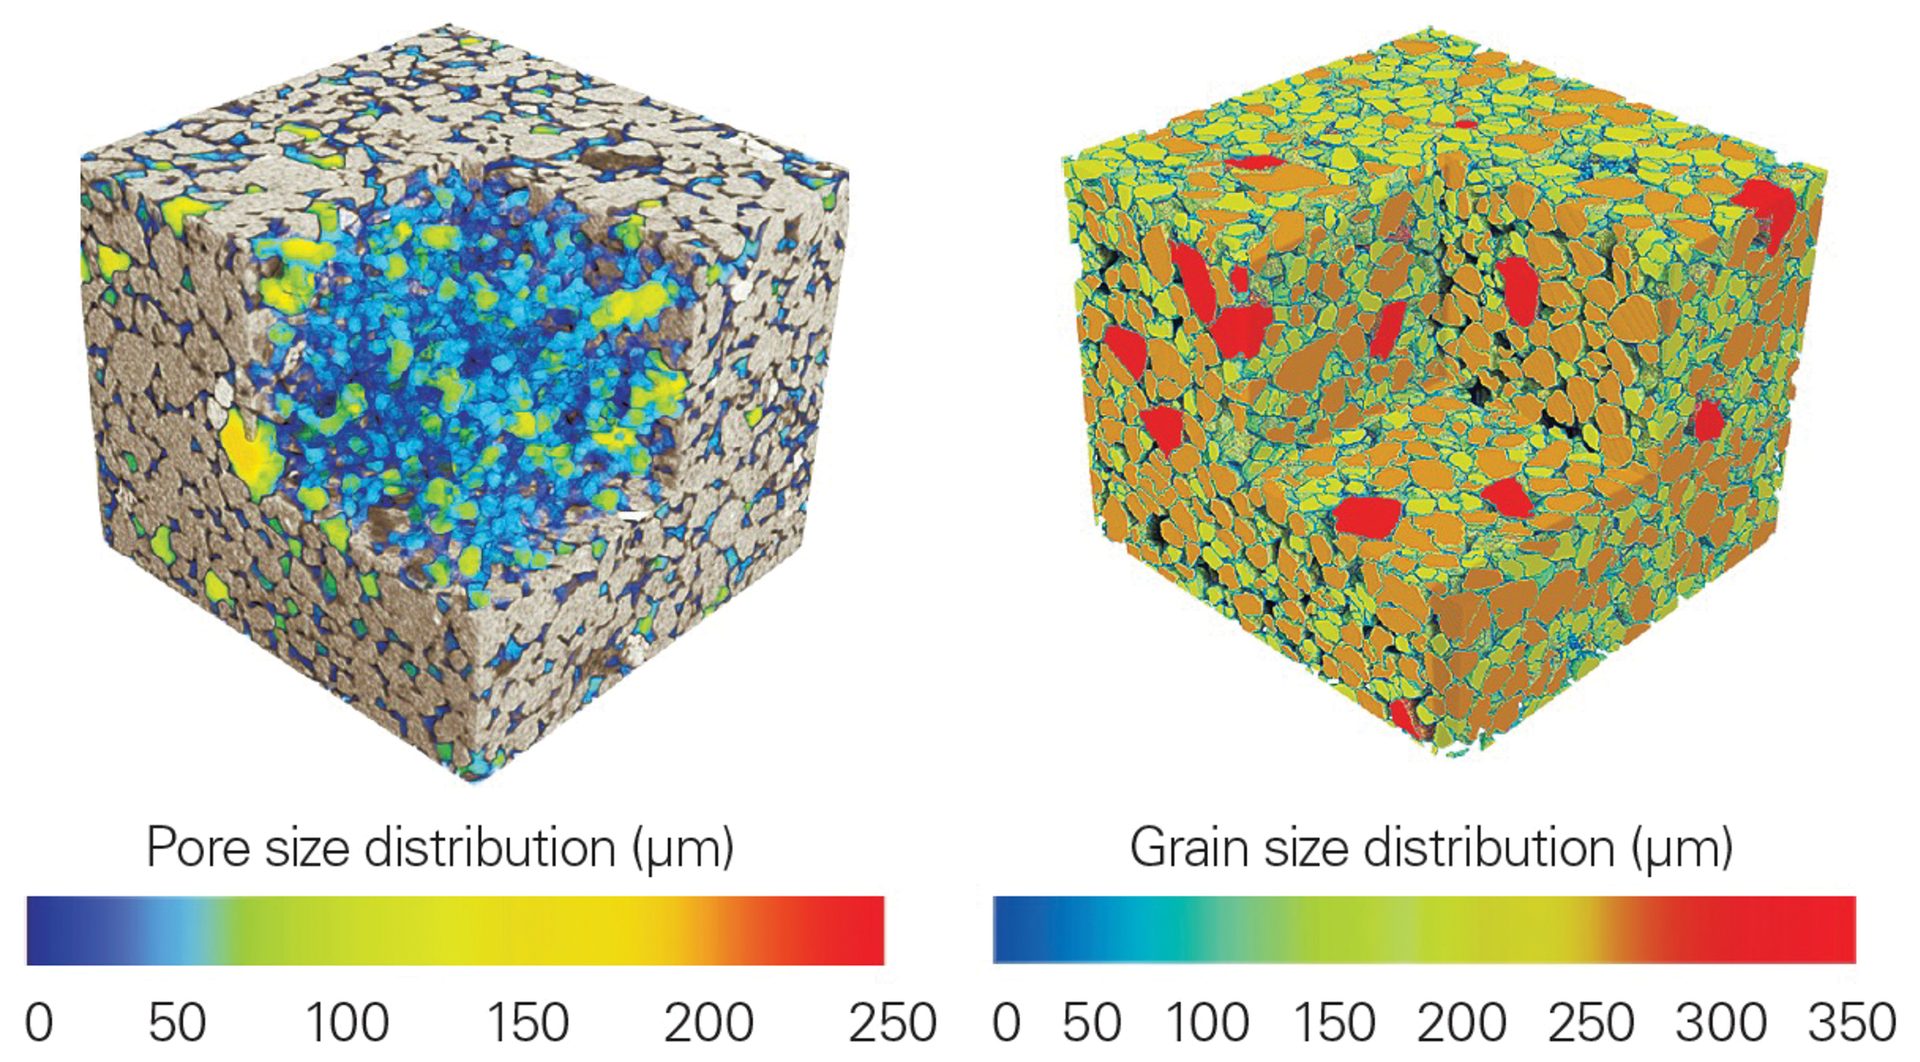 XRM data from a sandstone core with average size plotted as a function of intensity gradient for pores (left) and dense grains (right)